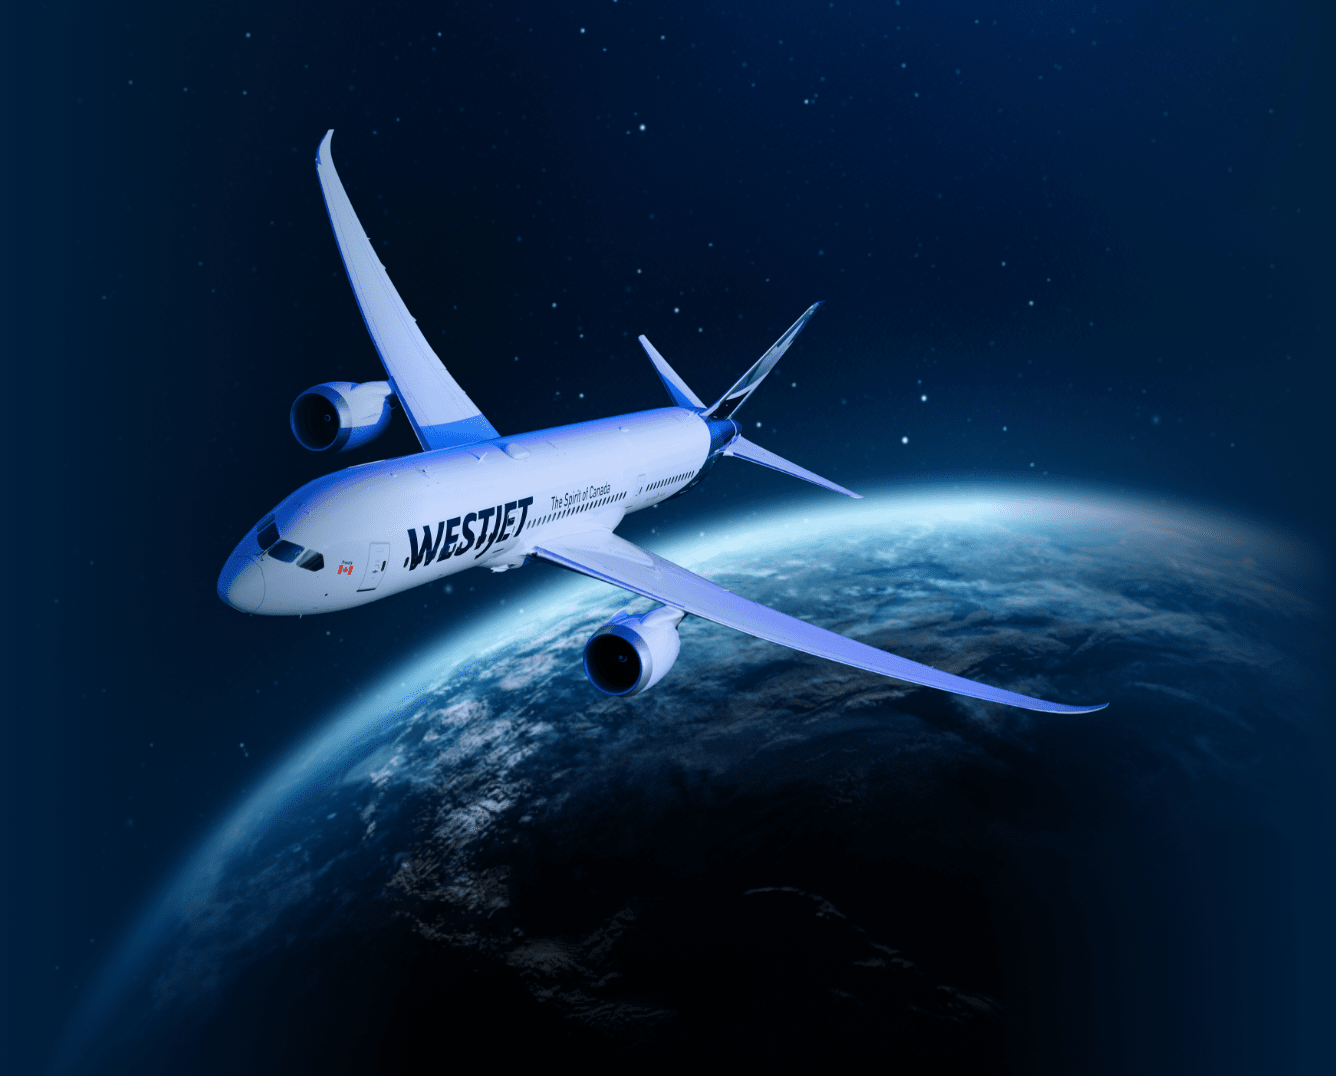 WestJet-x aircraft flying over planet earth